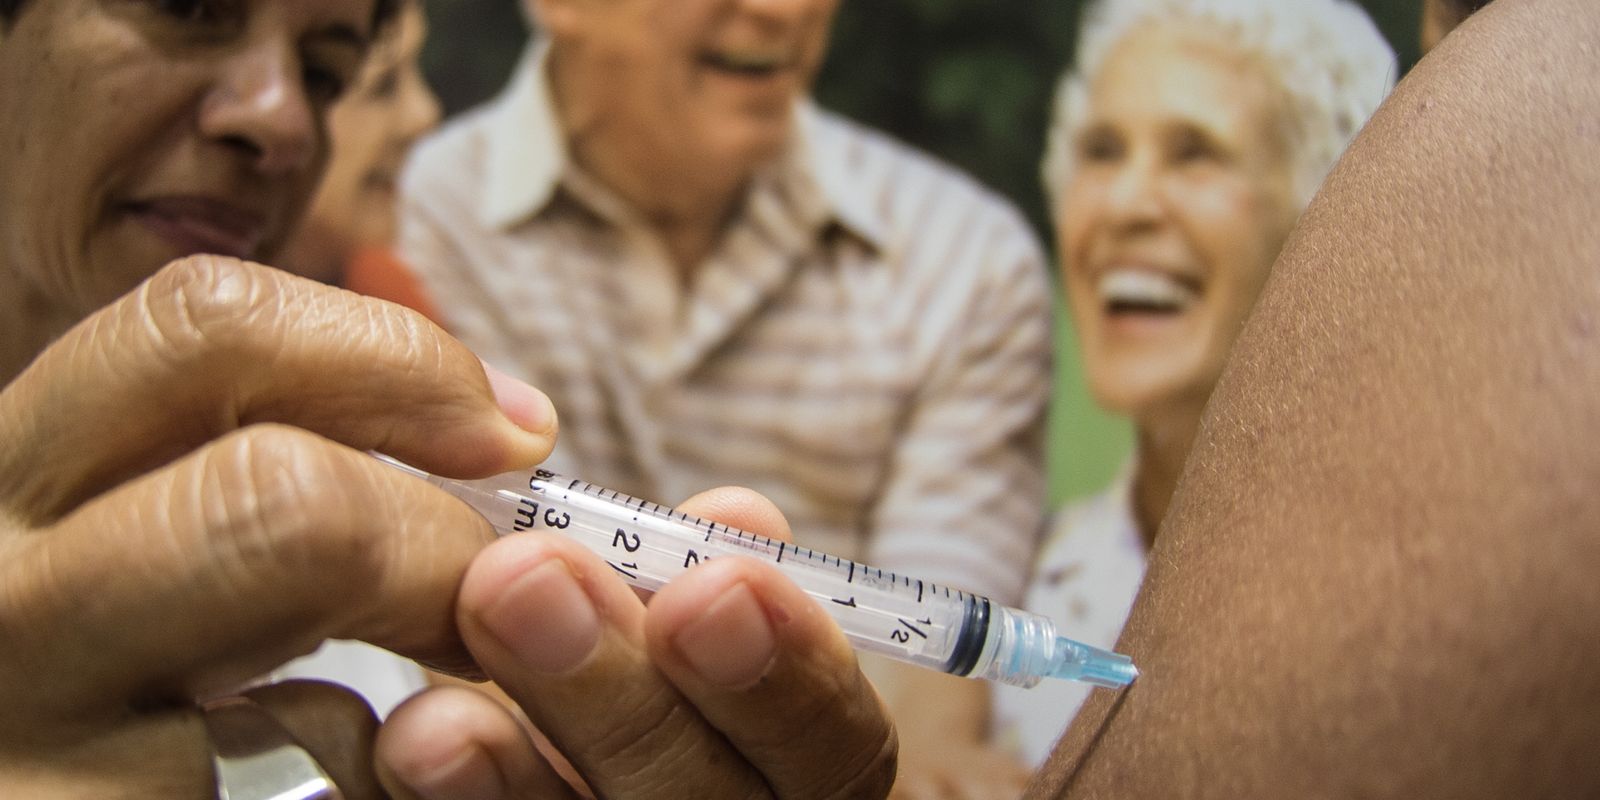 The flu campaign vaccinates 40% of the country’s target audience